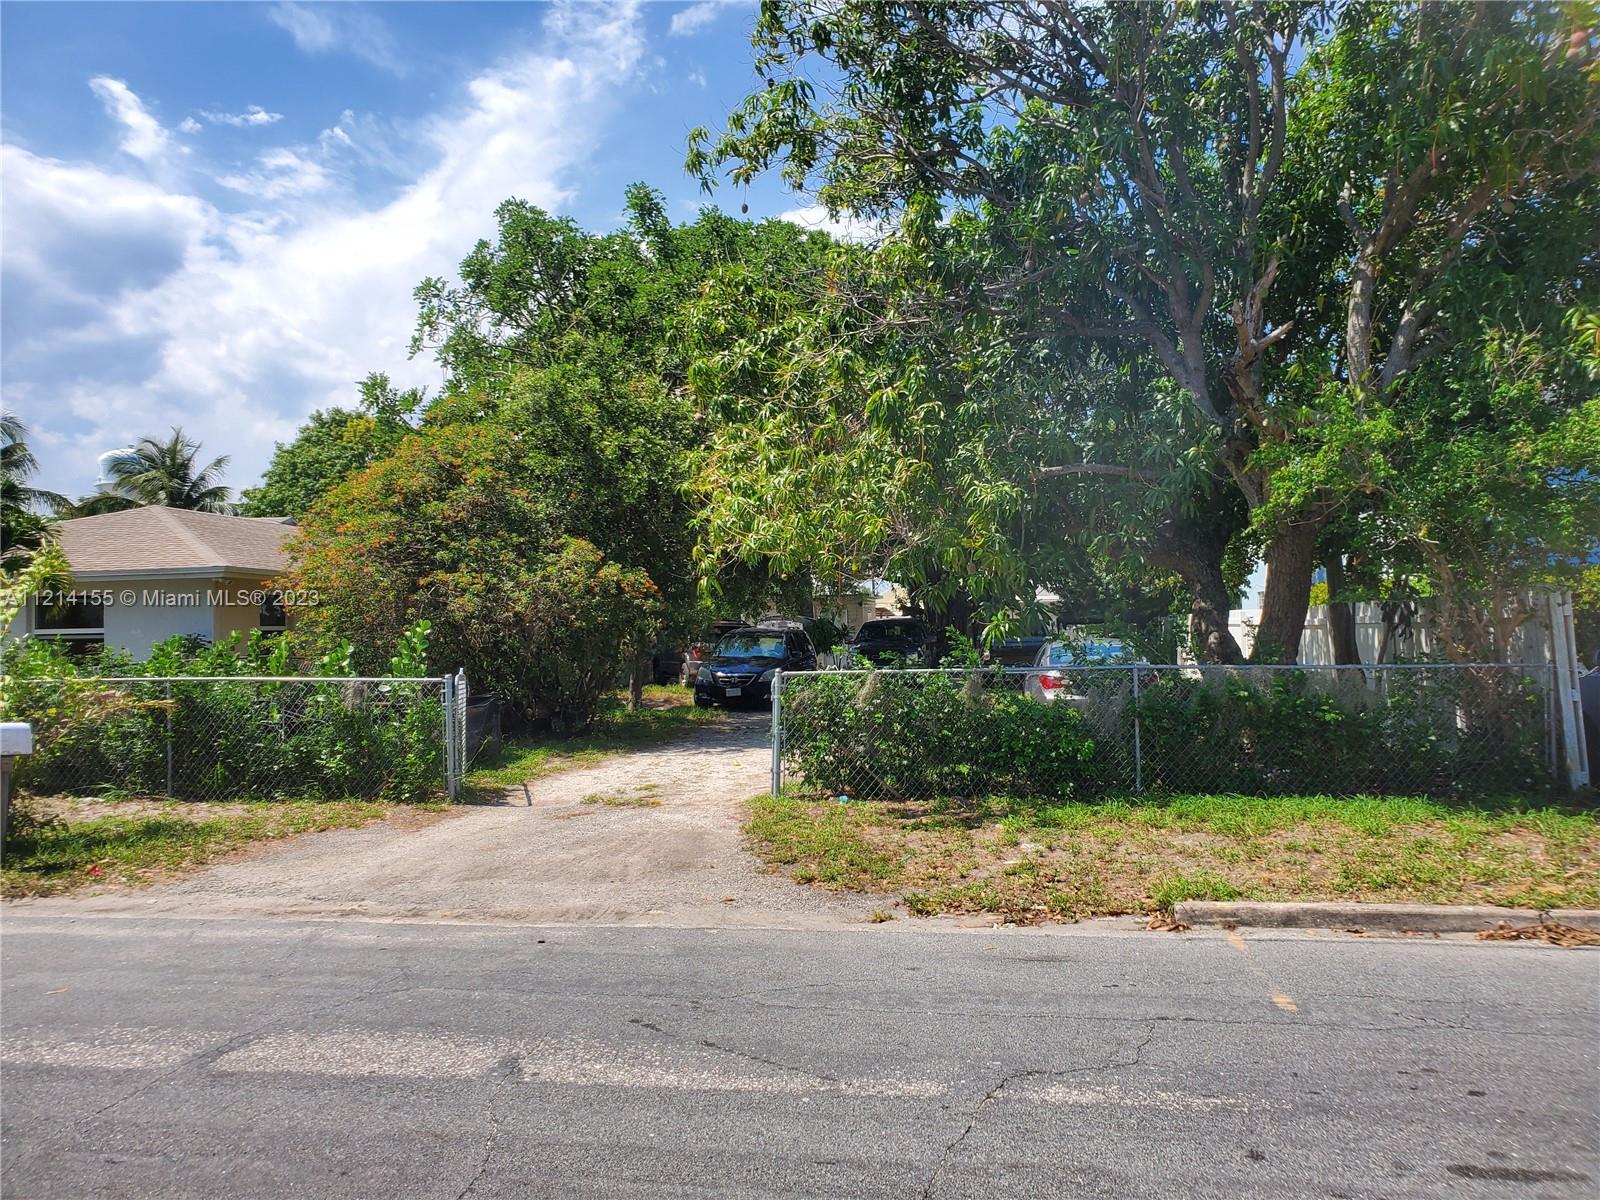 Property for Sale at 1212 N 19th Ave N, Lake Worth, Palm Beach County, Florida - Bedrooms: 3 
Bathrooms: 1  - $359,500